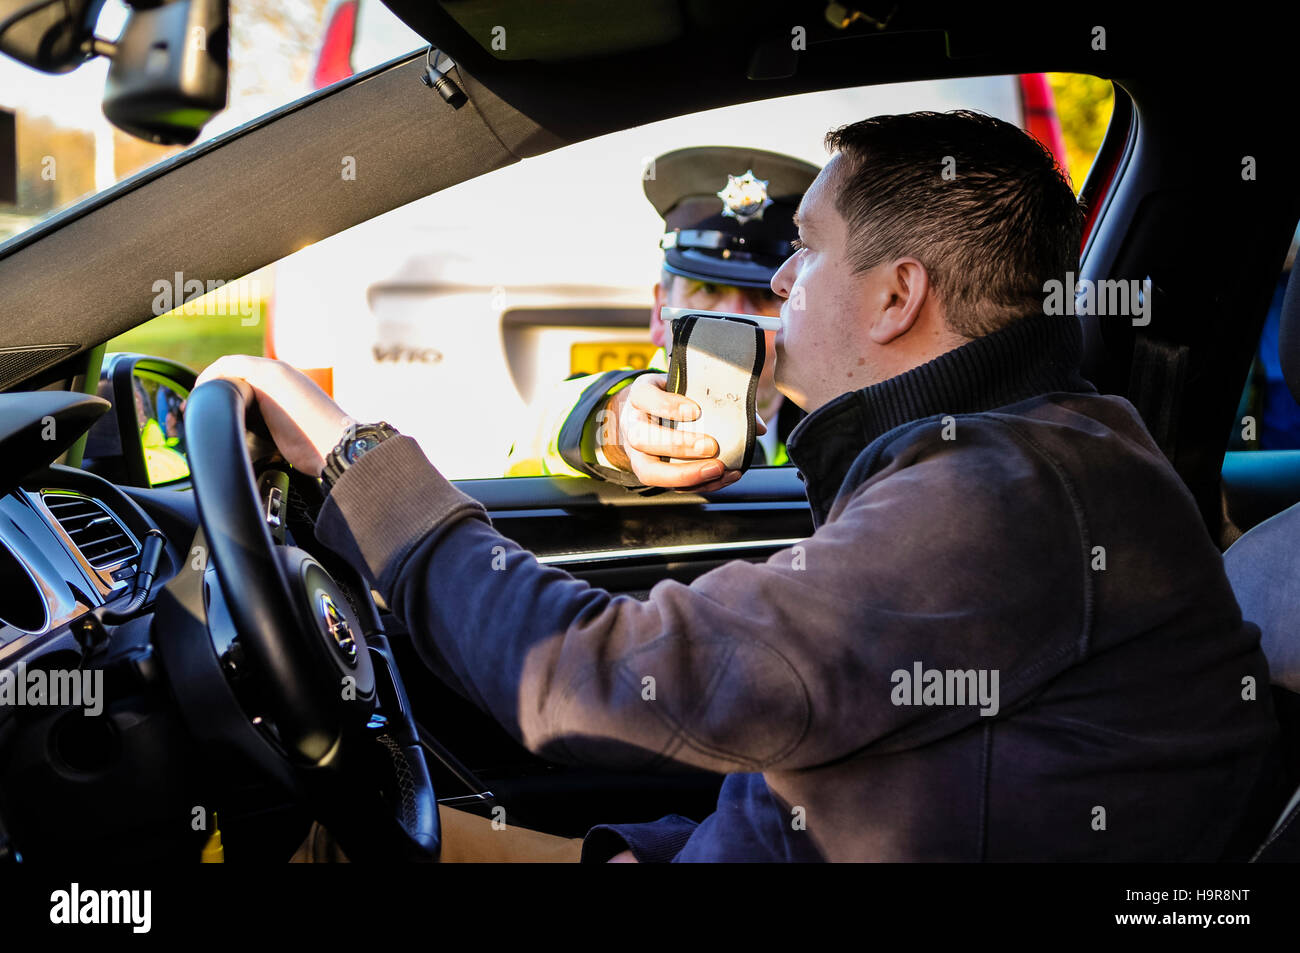 Belfast, Northern Ireland. 24 Nov 2016 - A driver blows into a roadside handheld alcohol breath tester breathalyser while it is held by a traffic police officer. Credit:  Stephen Barnes/Alamy Live News Stock Photo